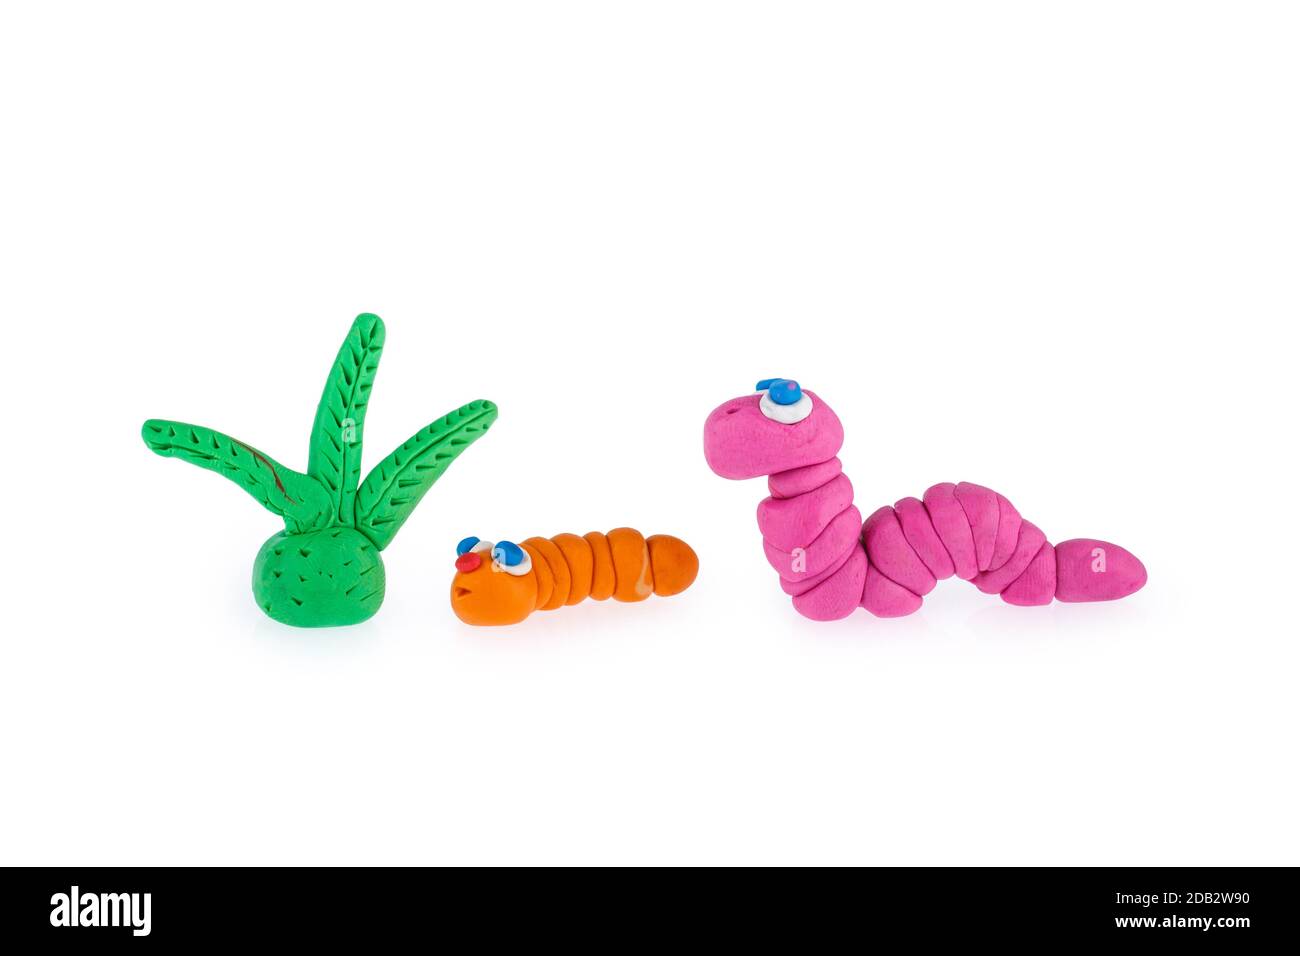 Worm and Earthworm from plasticine Stock Photo